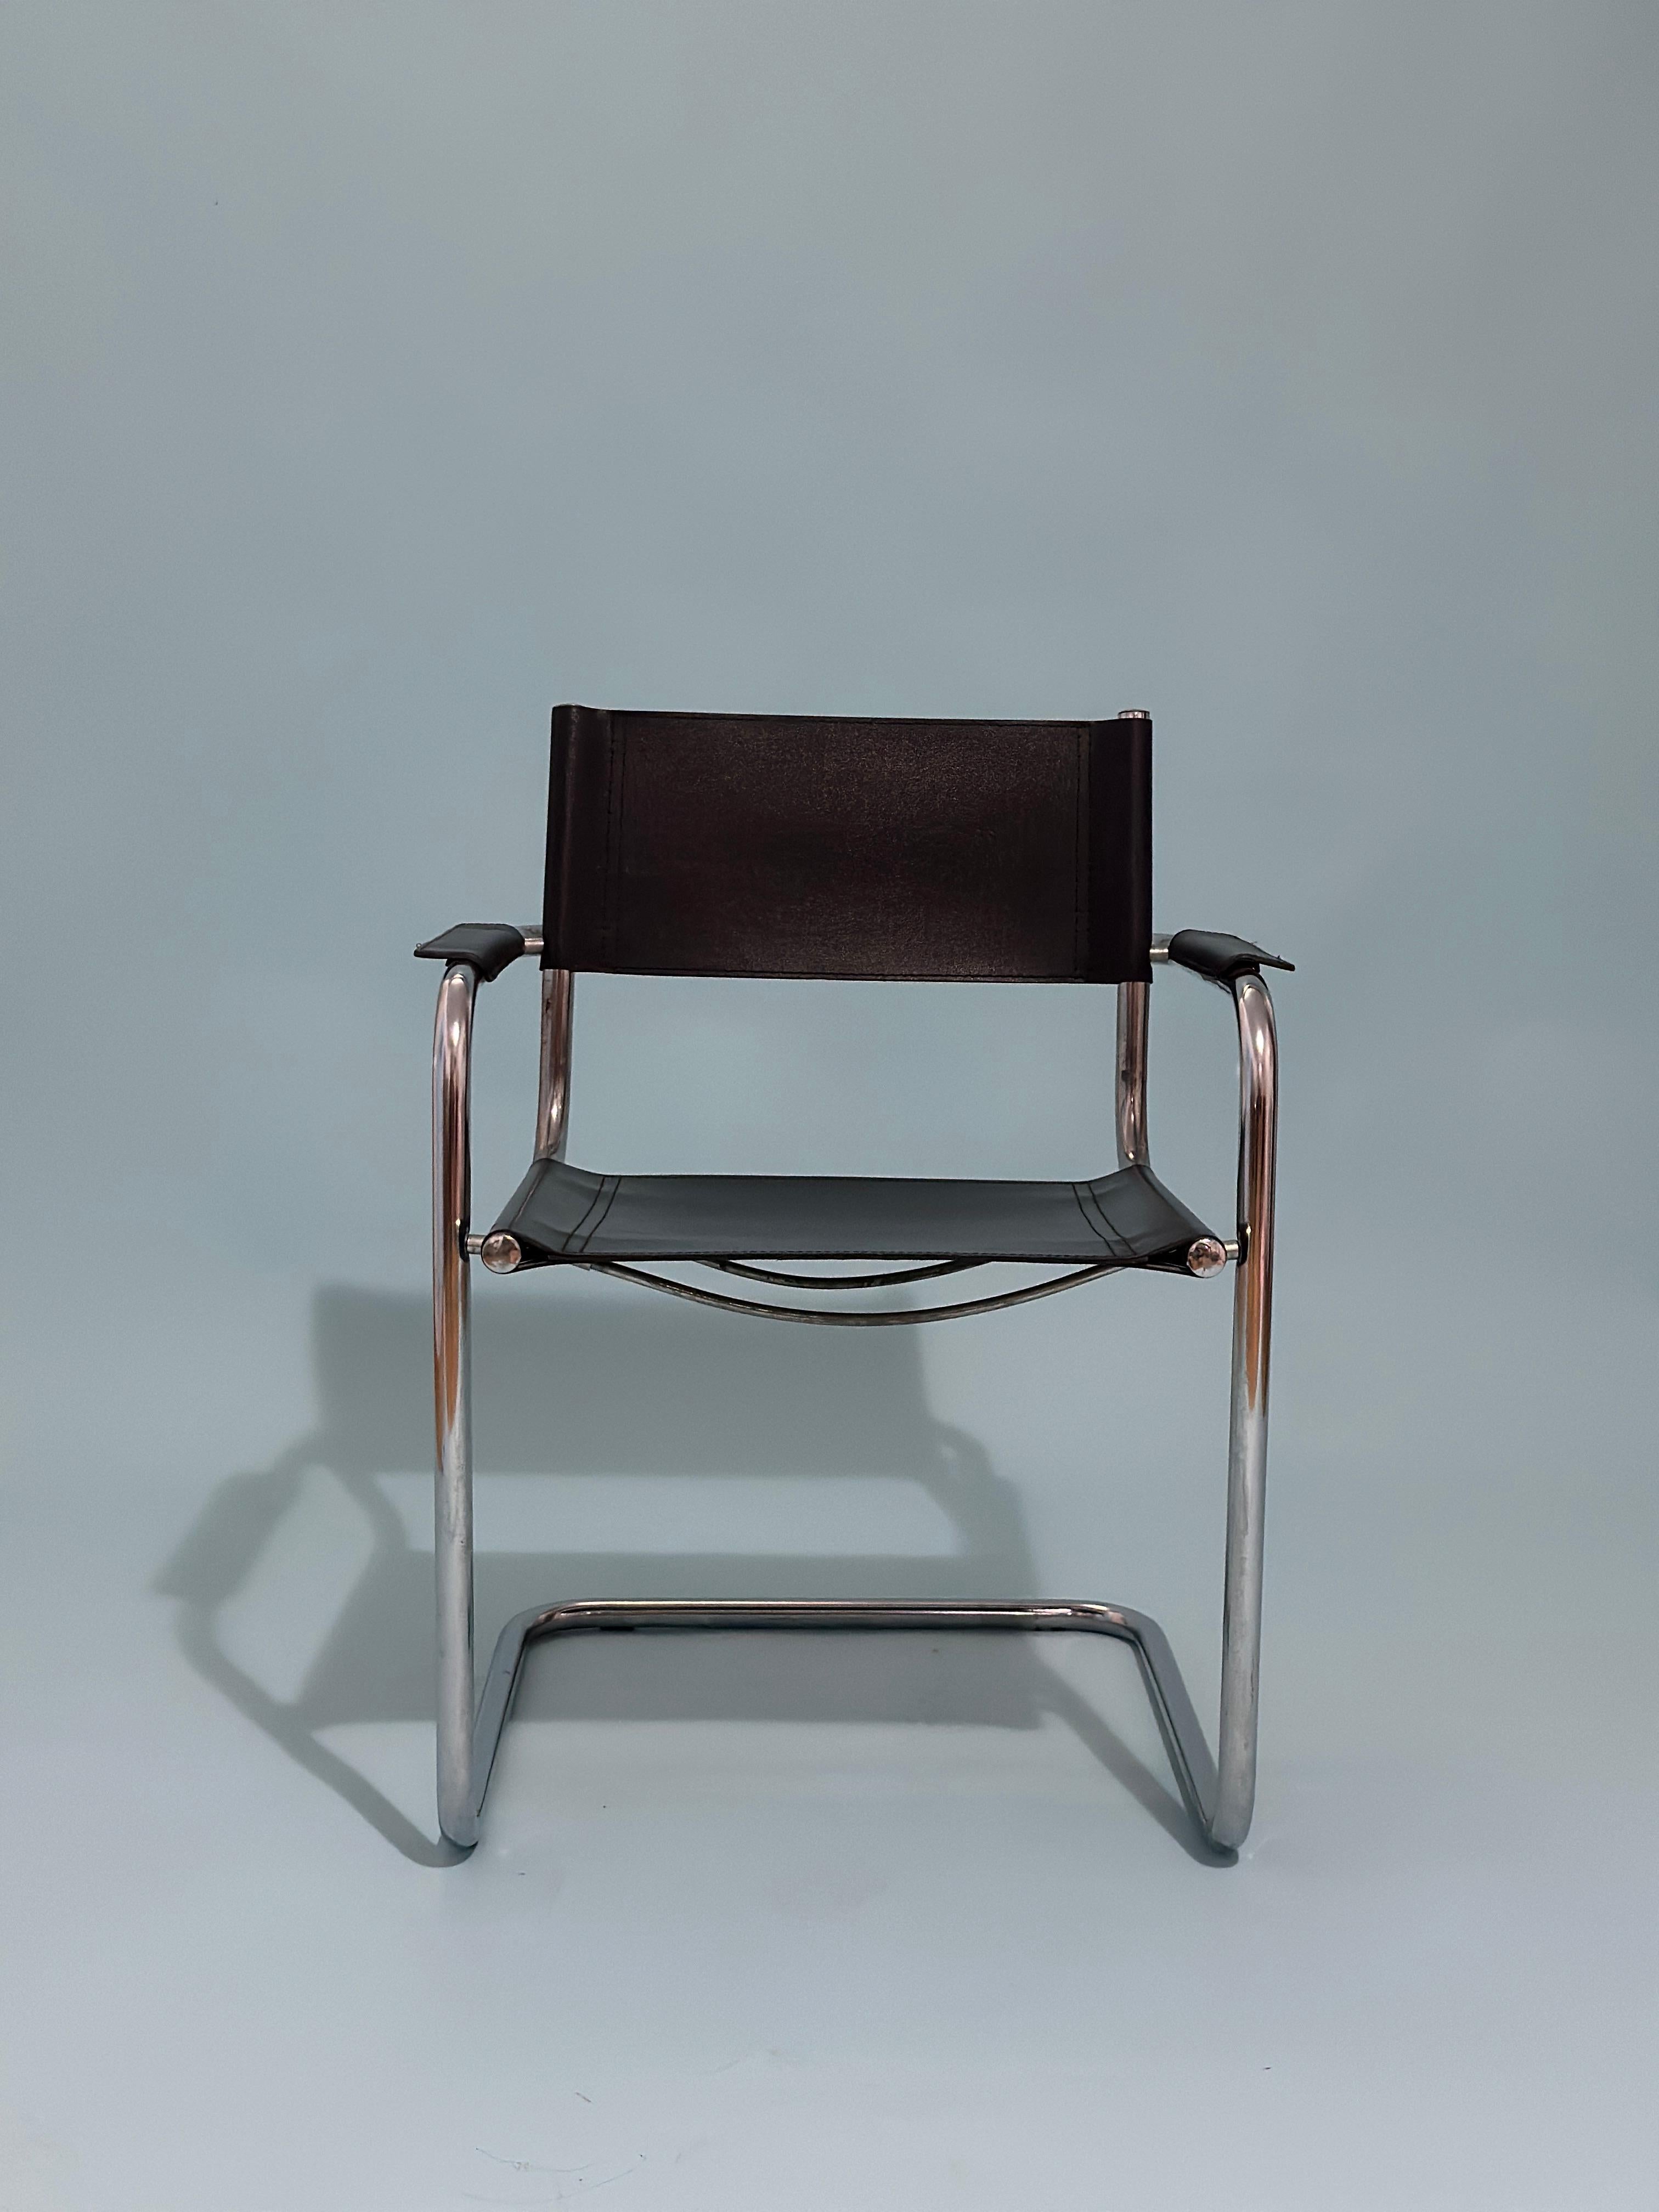 Bauhaus Mart Stam Canrilever Chairs Italy 1980s For Sale